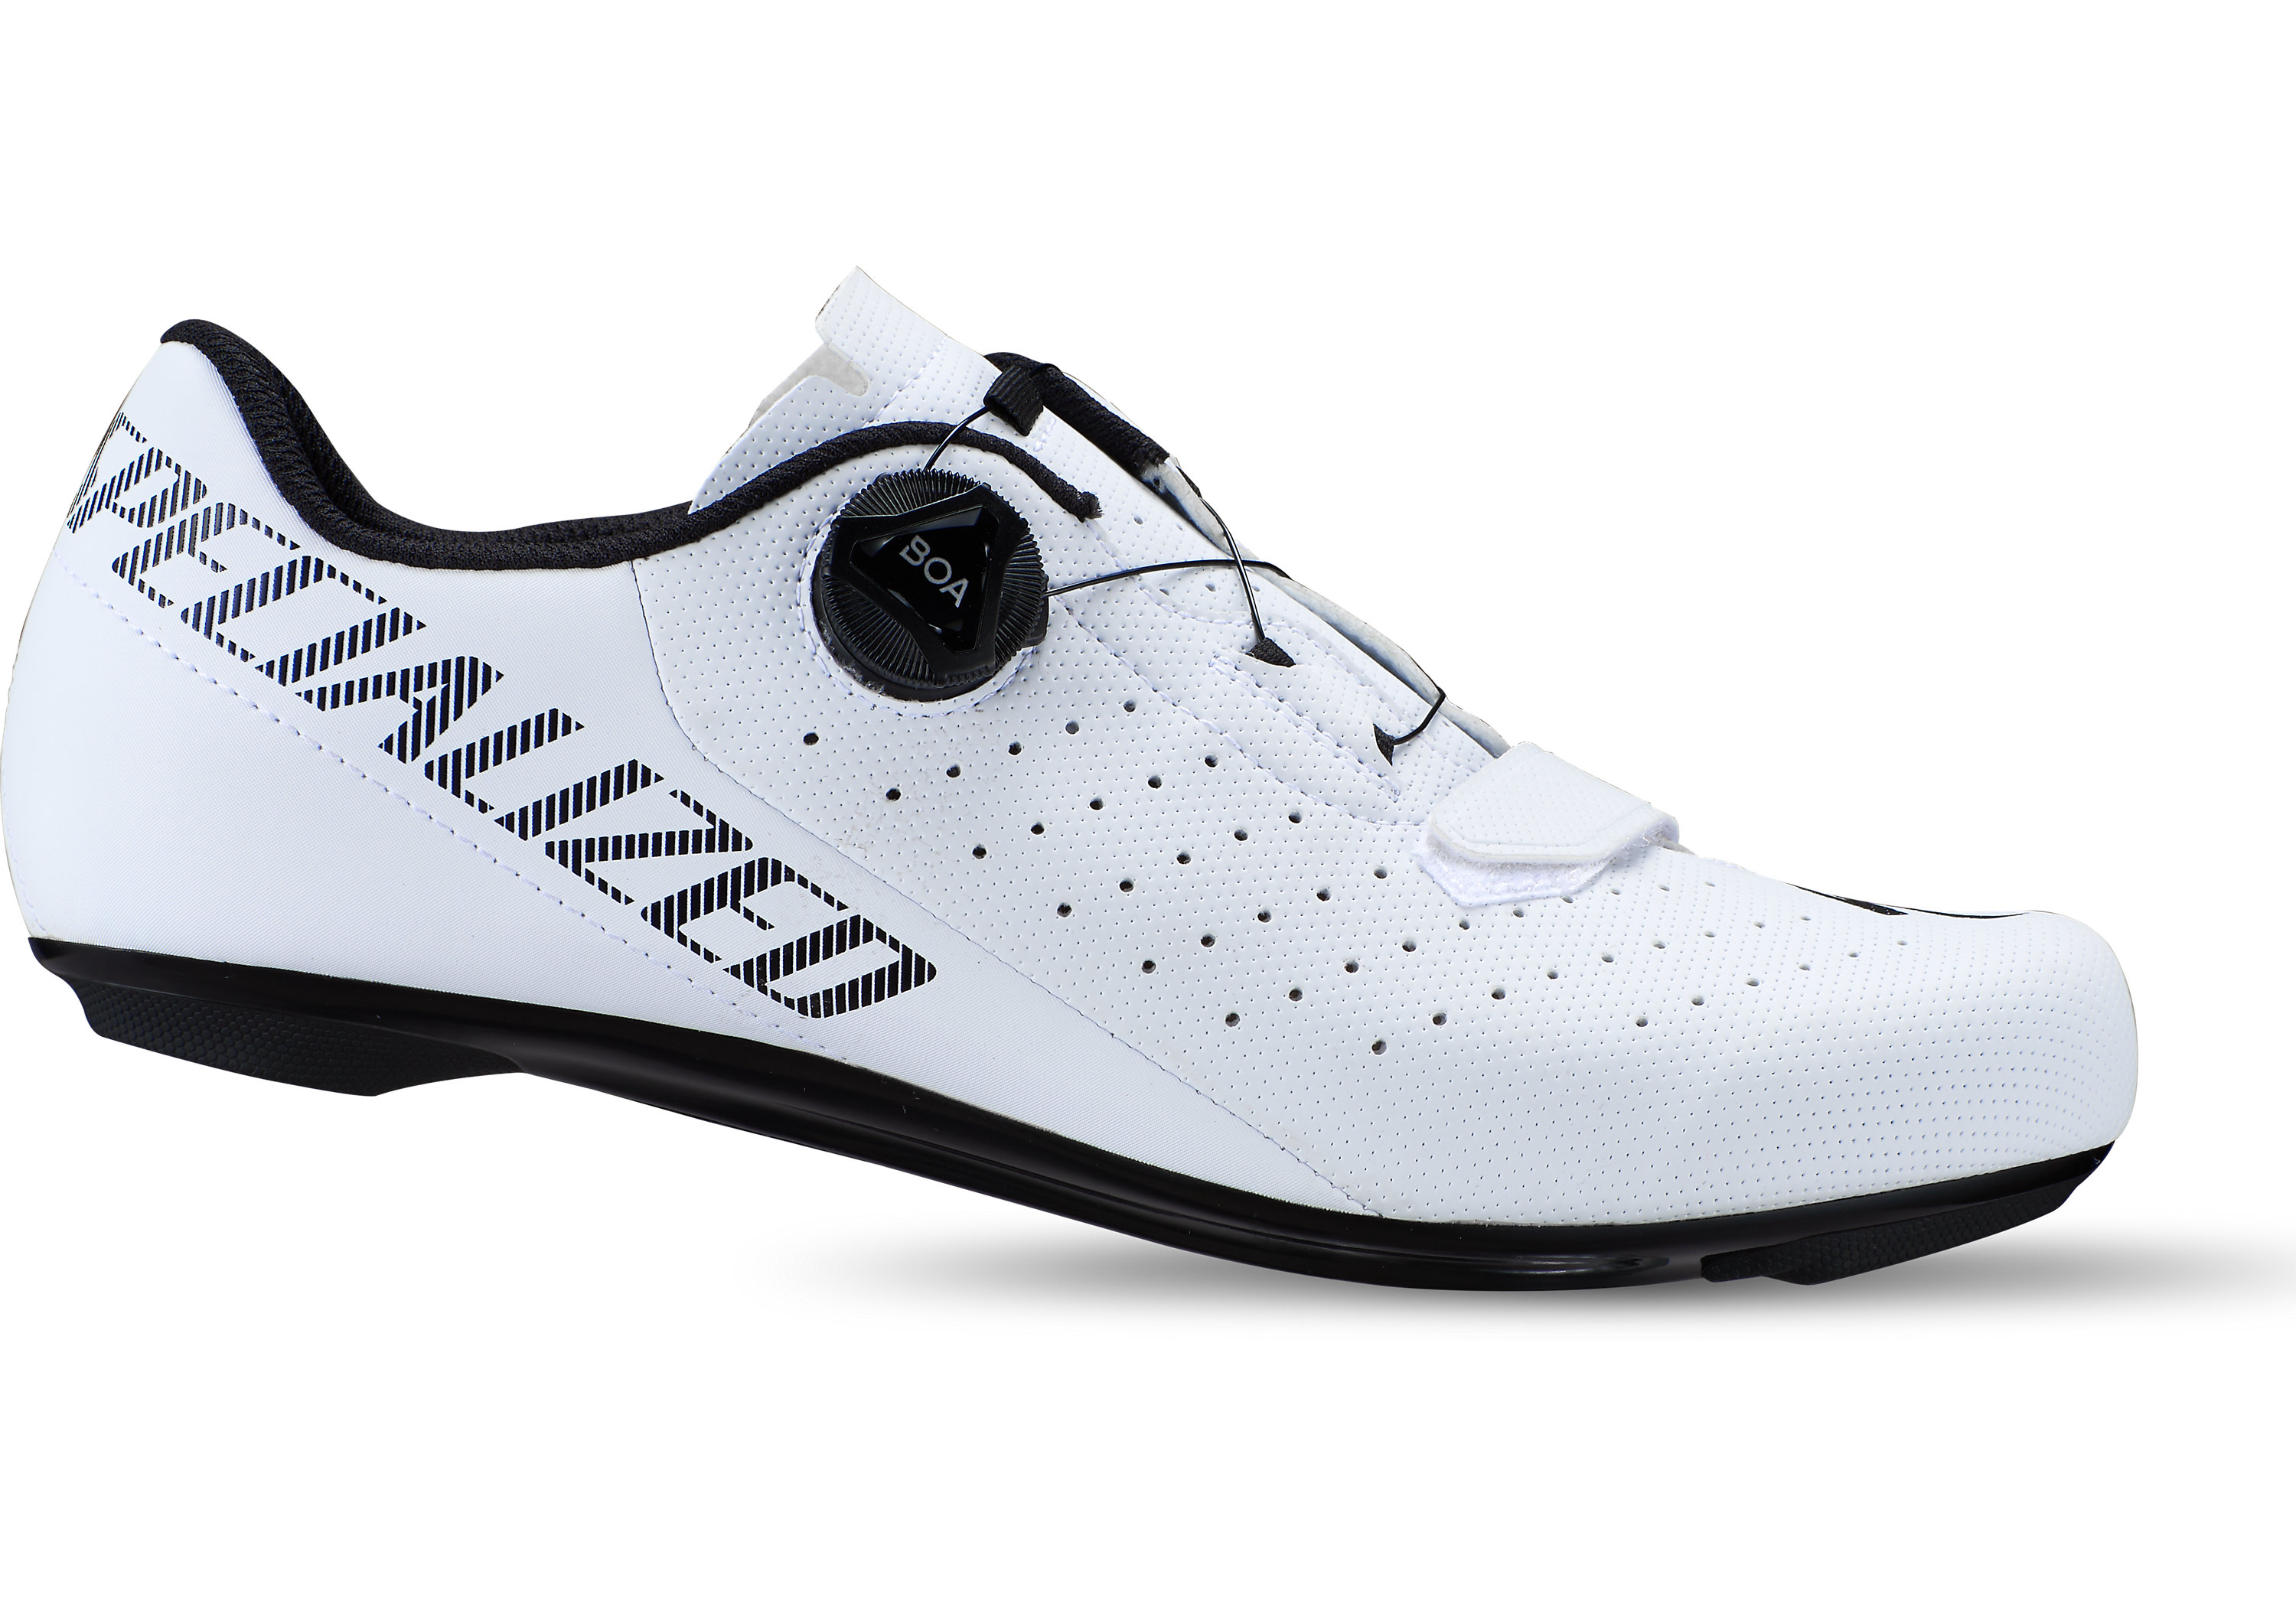 Велообувь Specialized TORCH 1.0 RD SHOE WHT 42 2020	61020-5542